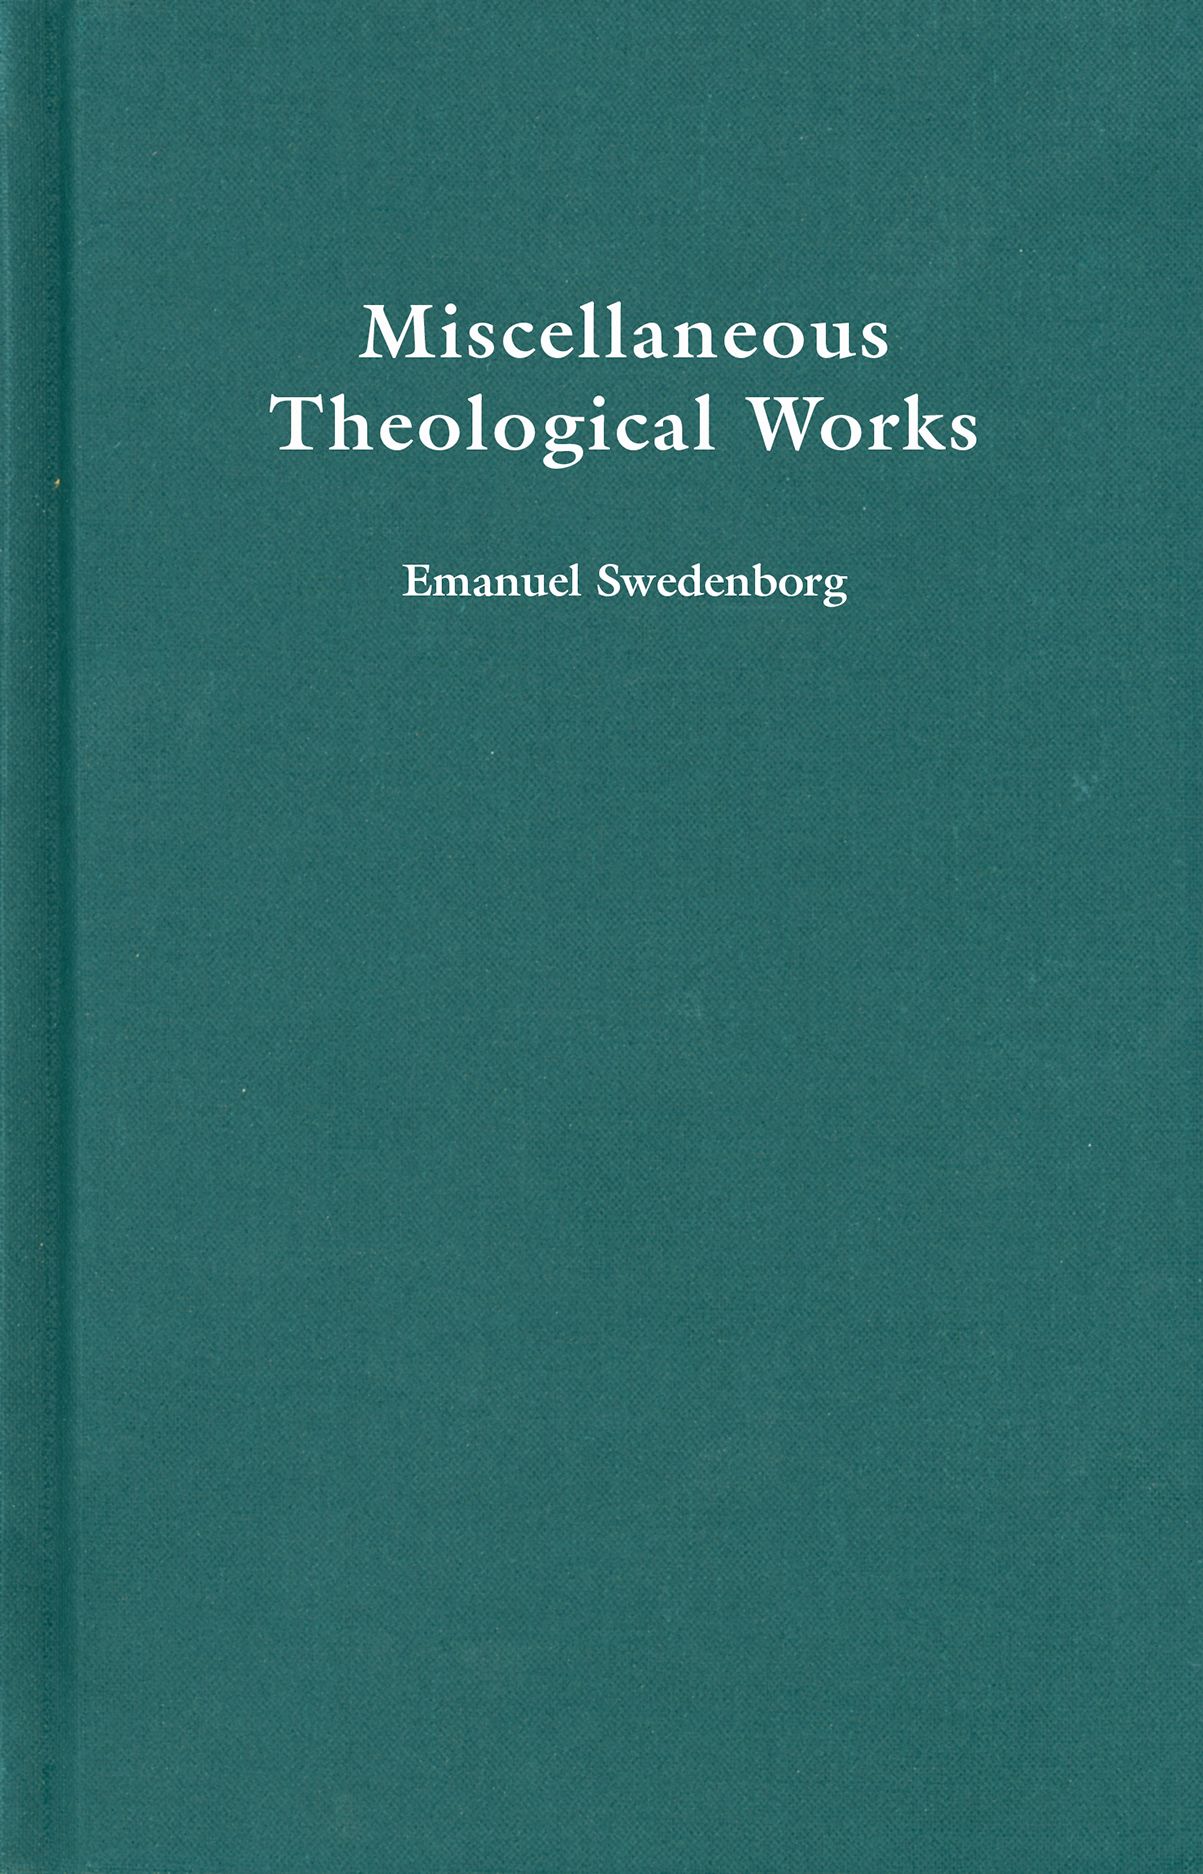 MISCELLANEOUS THEOLOGICAL WORKS